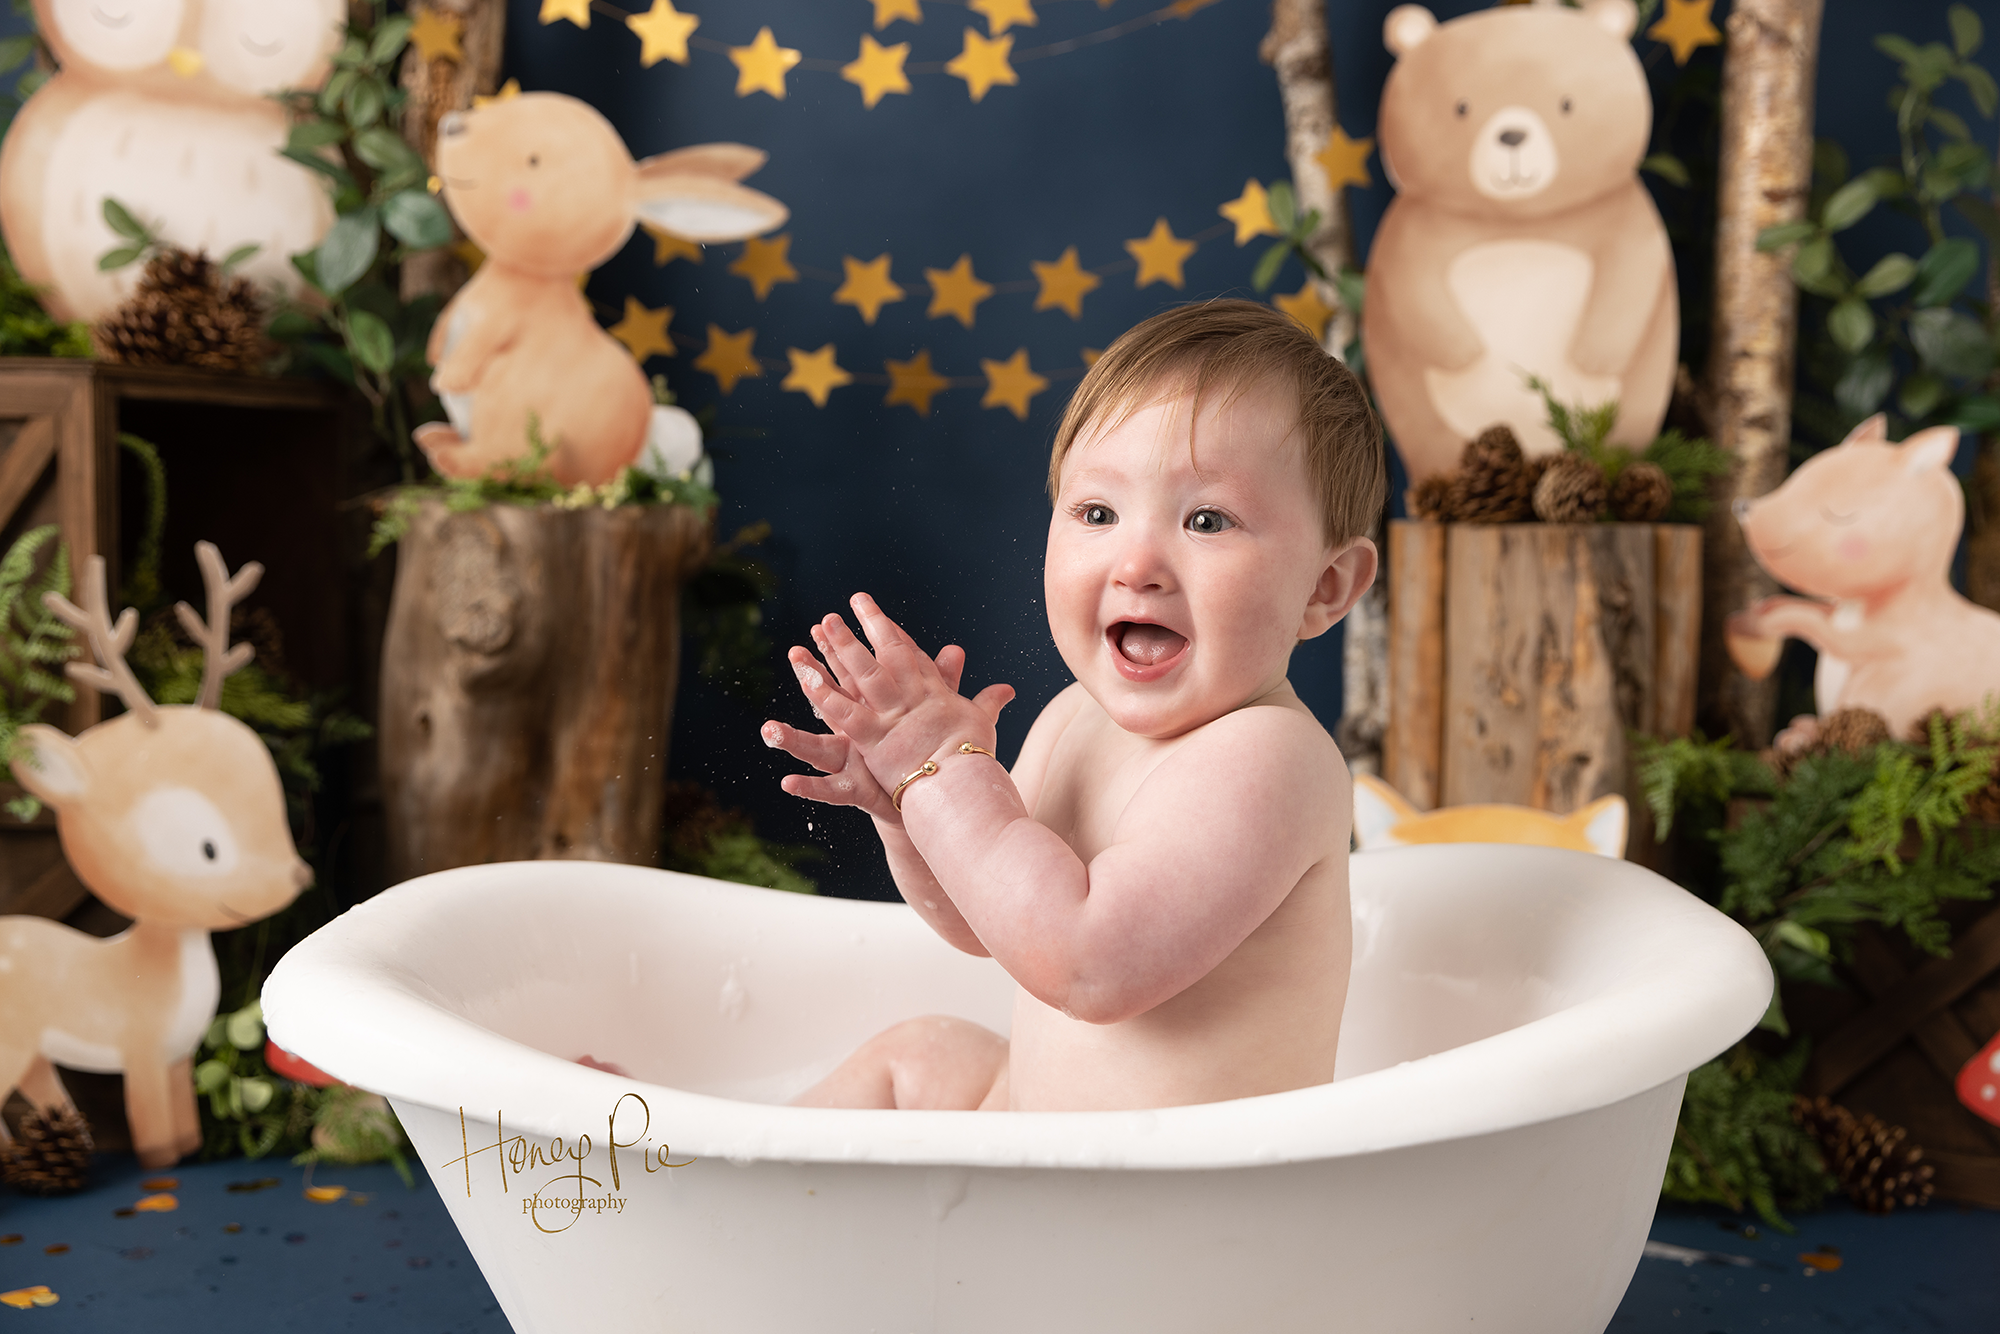 Baby happy clapping in a bubble bath